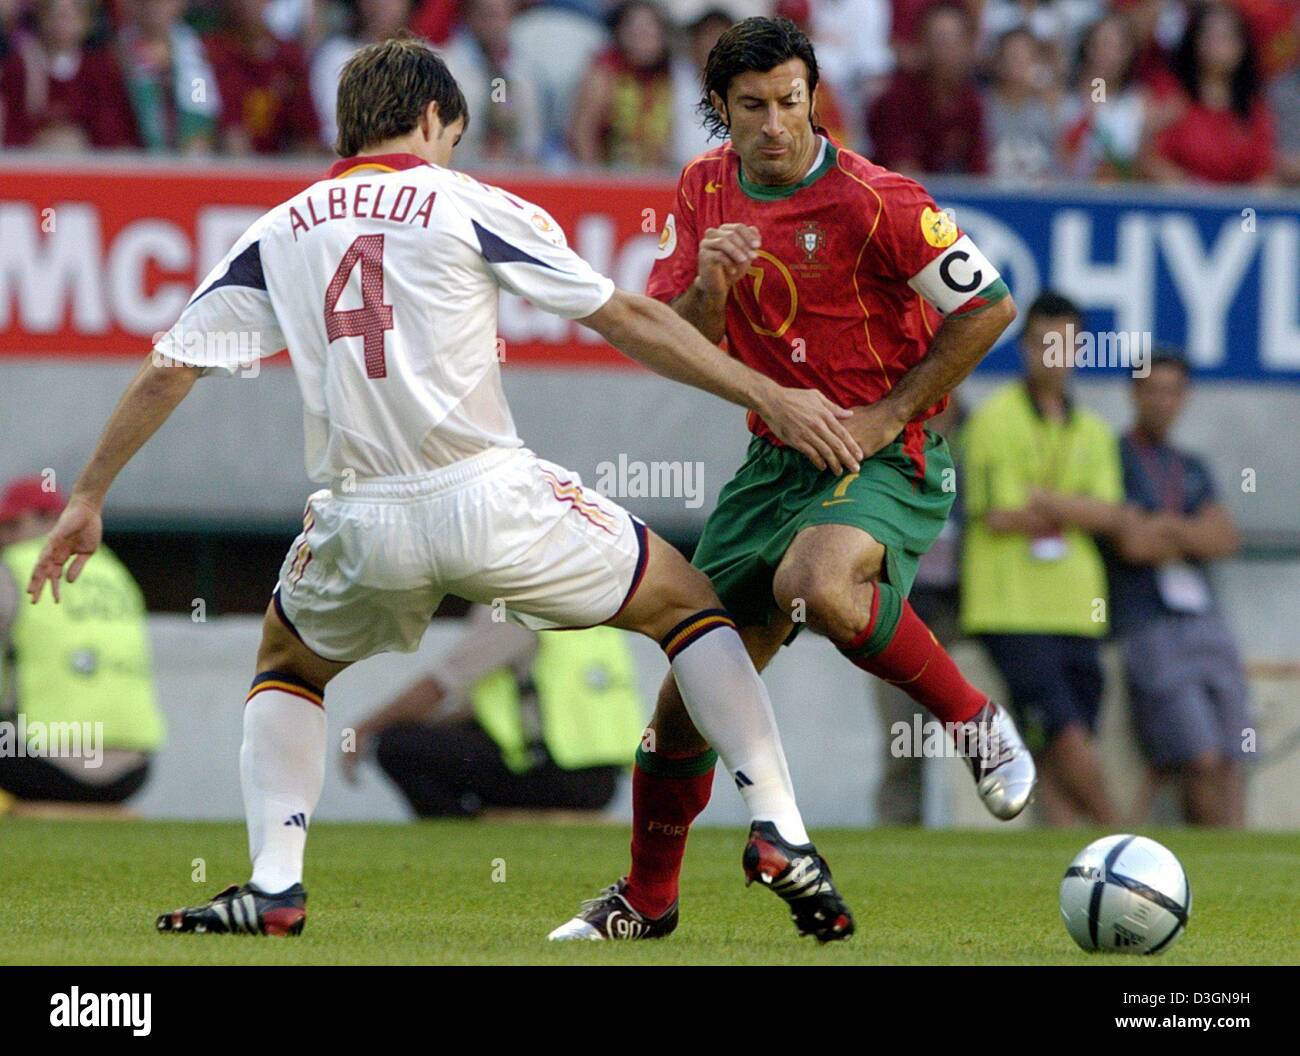 (dpa) - Portugal team captain and midfielder Luis Figo (R) fights for the ball with Spain midfielder David Albelda (L) during the Euro 2004 group A match between rivals Spain and Portugal at Jose Alvalade Stadium in Lisbon, Portugal, 20 June 2004. Portugal advanced to the quarterfinals with a 1-0 victory as Spain was eliminated. It was the first win of a Portuguese national team ov Stock Photo